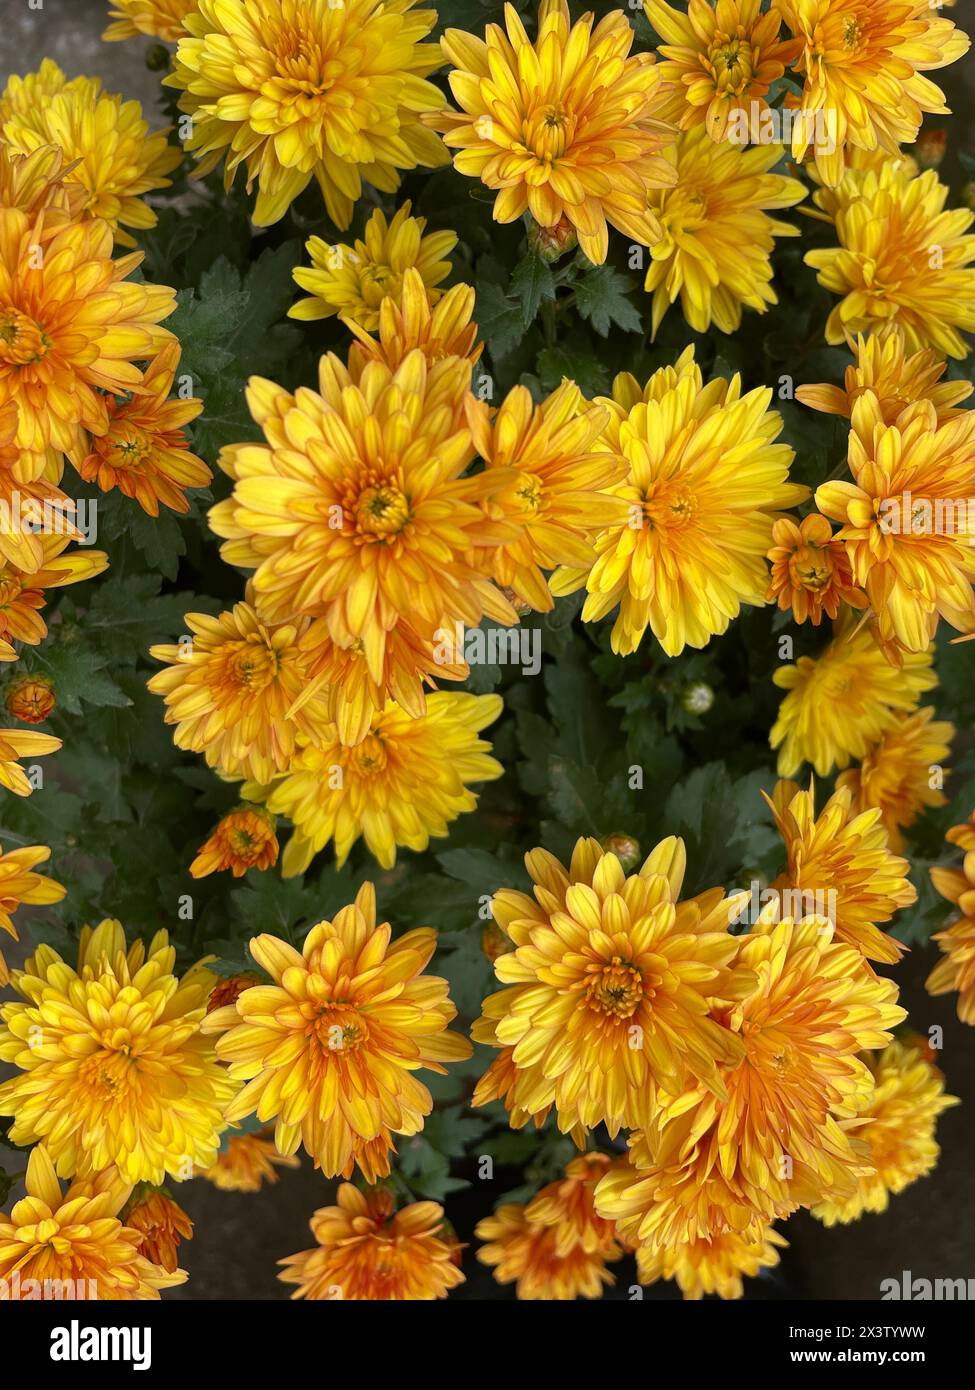 Chrysanthemum flower is a flower from species of perennial flowering plants in the family Asteraceae which is native to Asia and northeastern Europe. Stock Photo